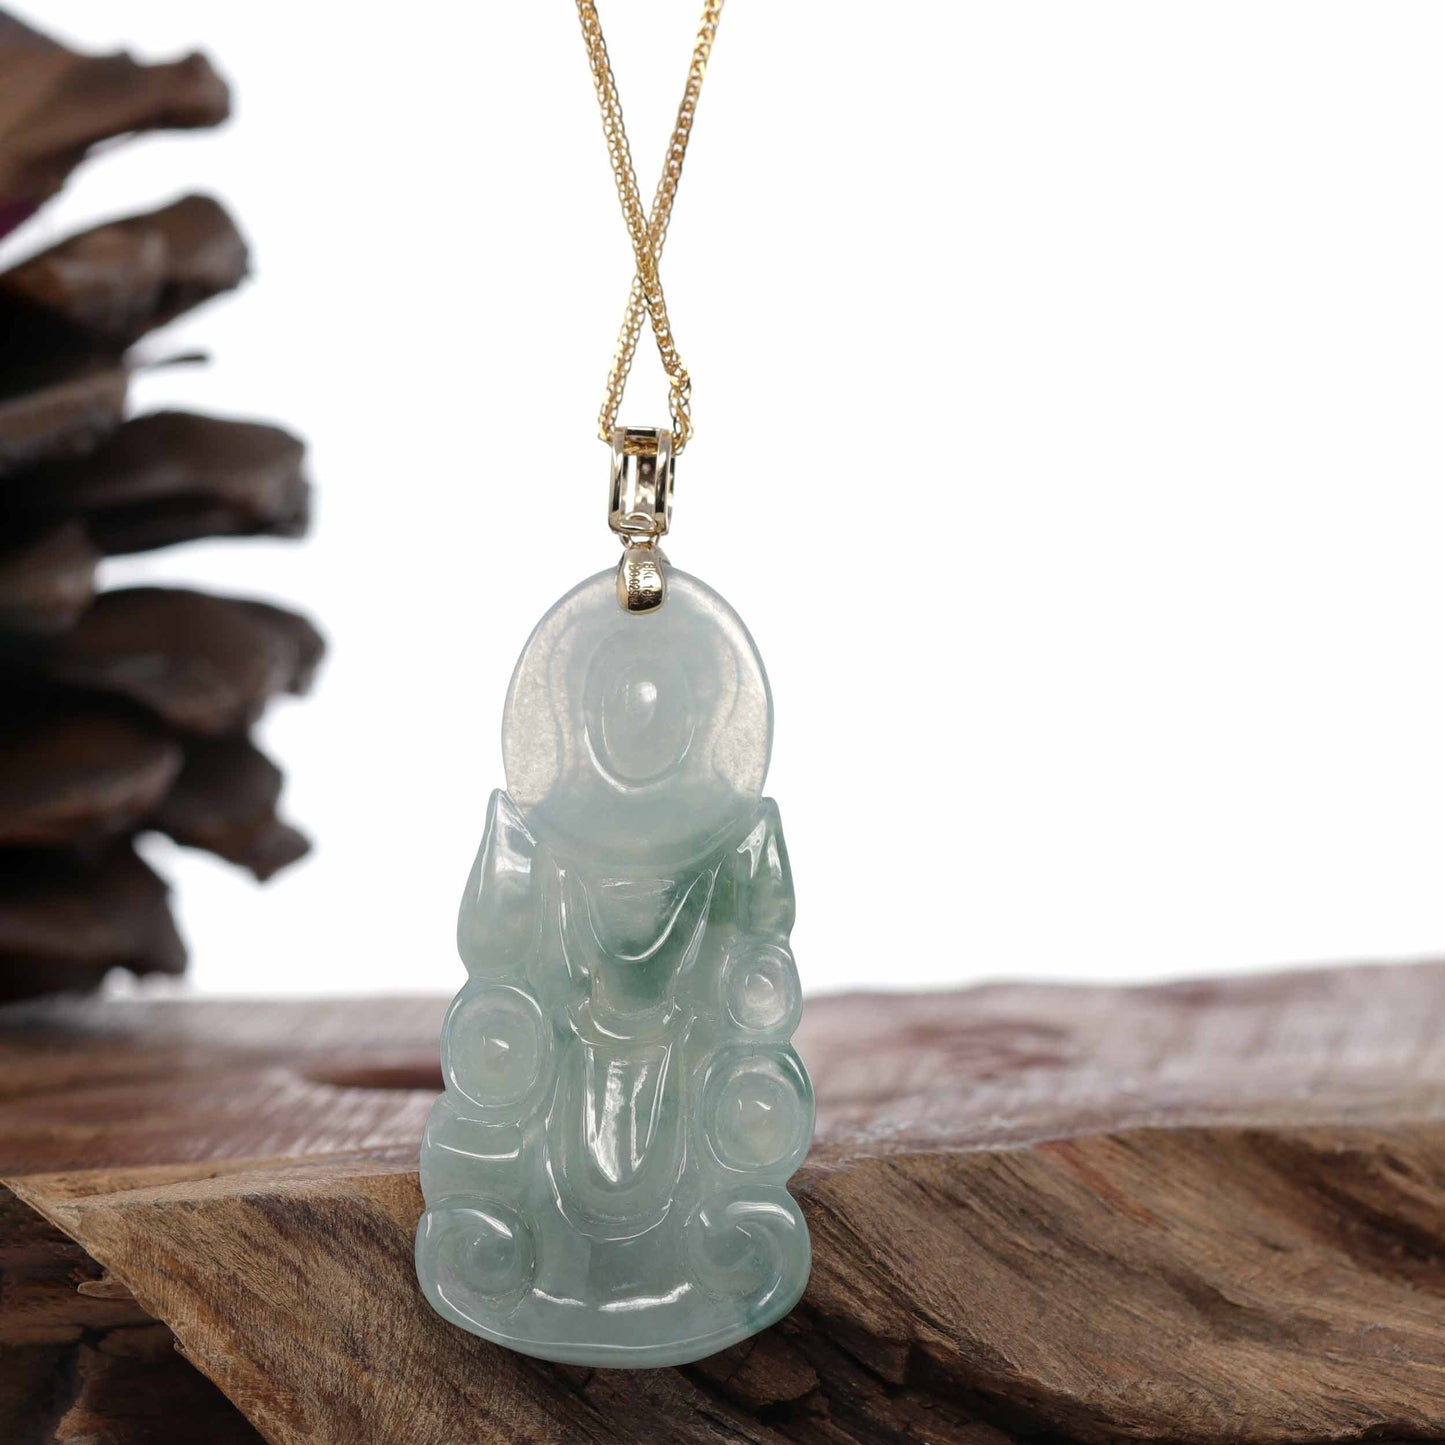 RealJade® Co. 14k Yellow Gold "Goddess of Compassion" Genuine Ice Burmese Jadeite Jade Guanyin Necklace With Gold Bail